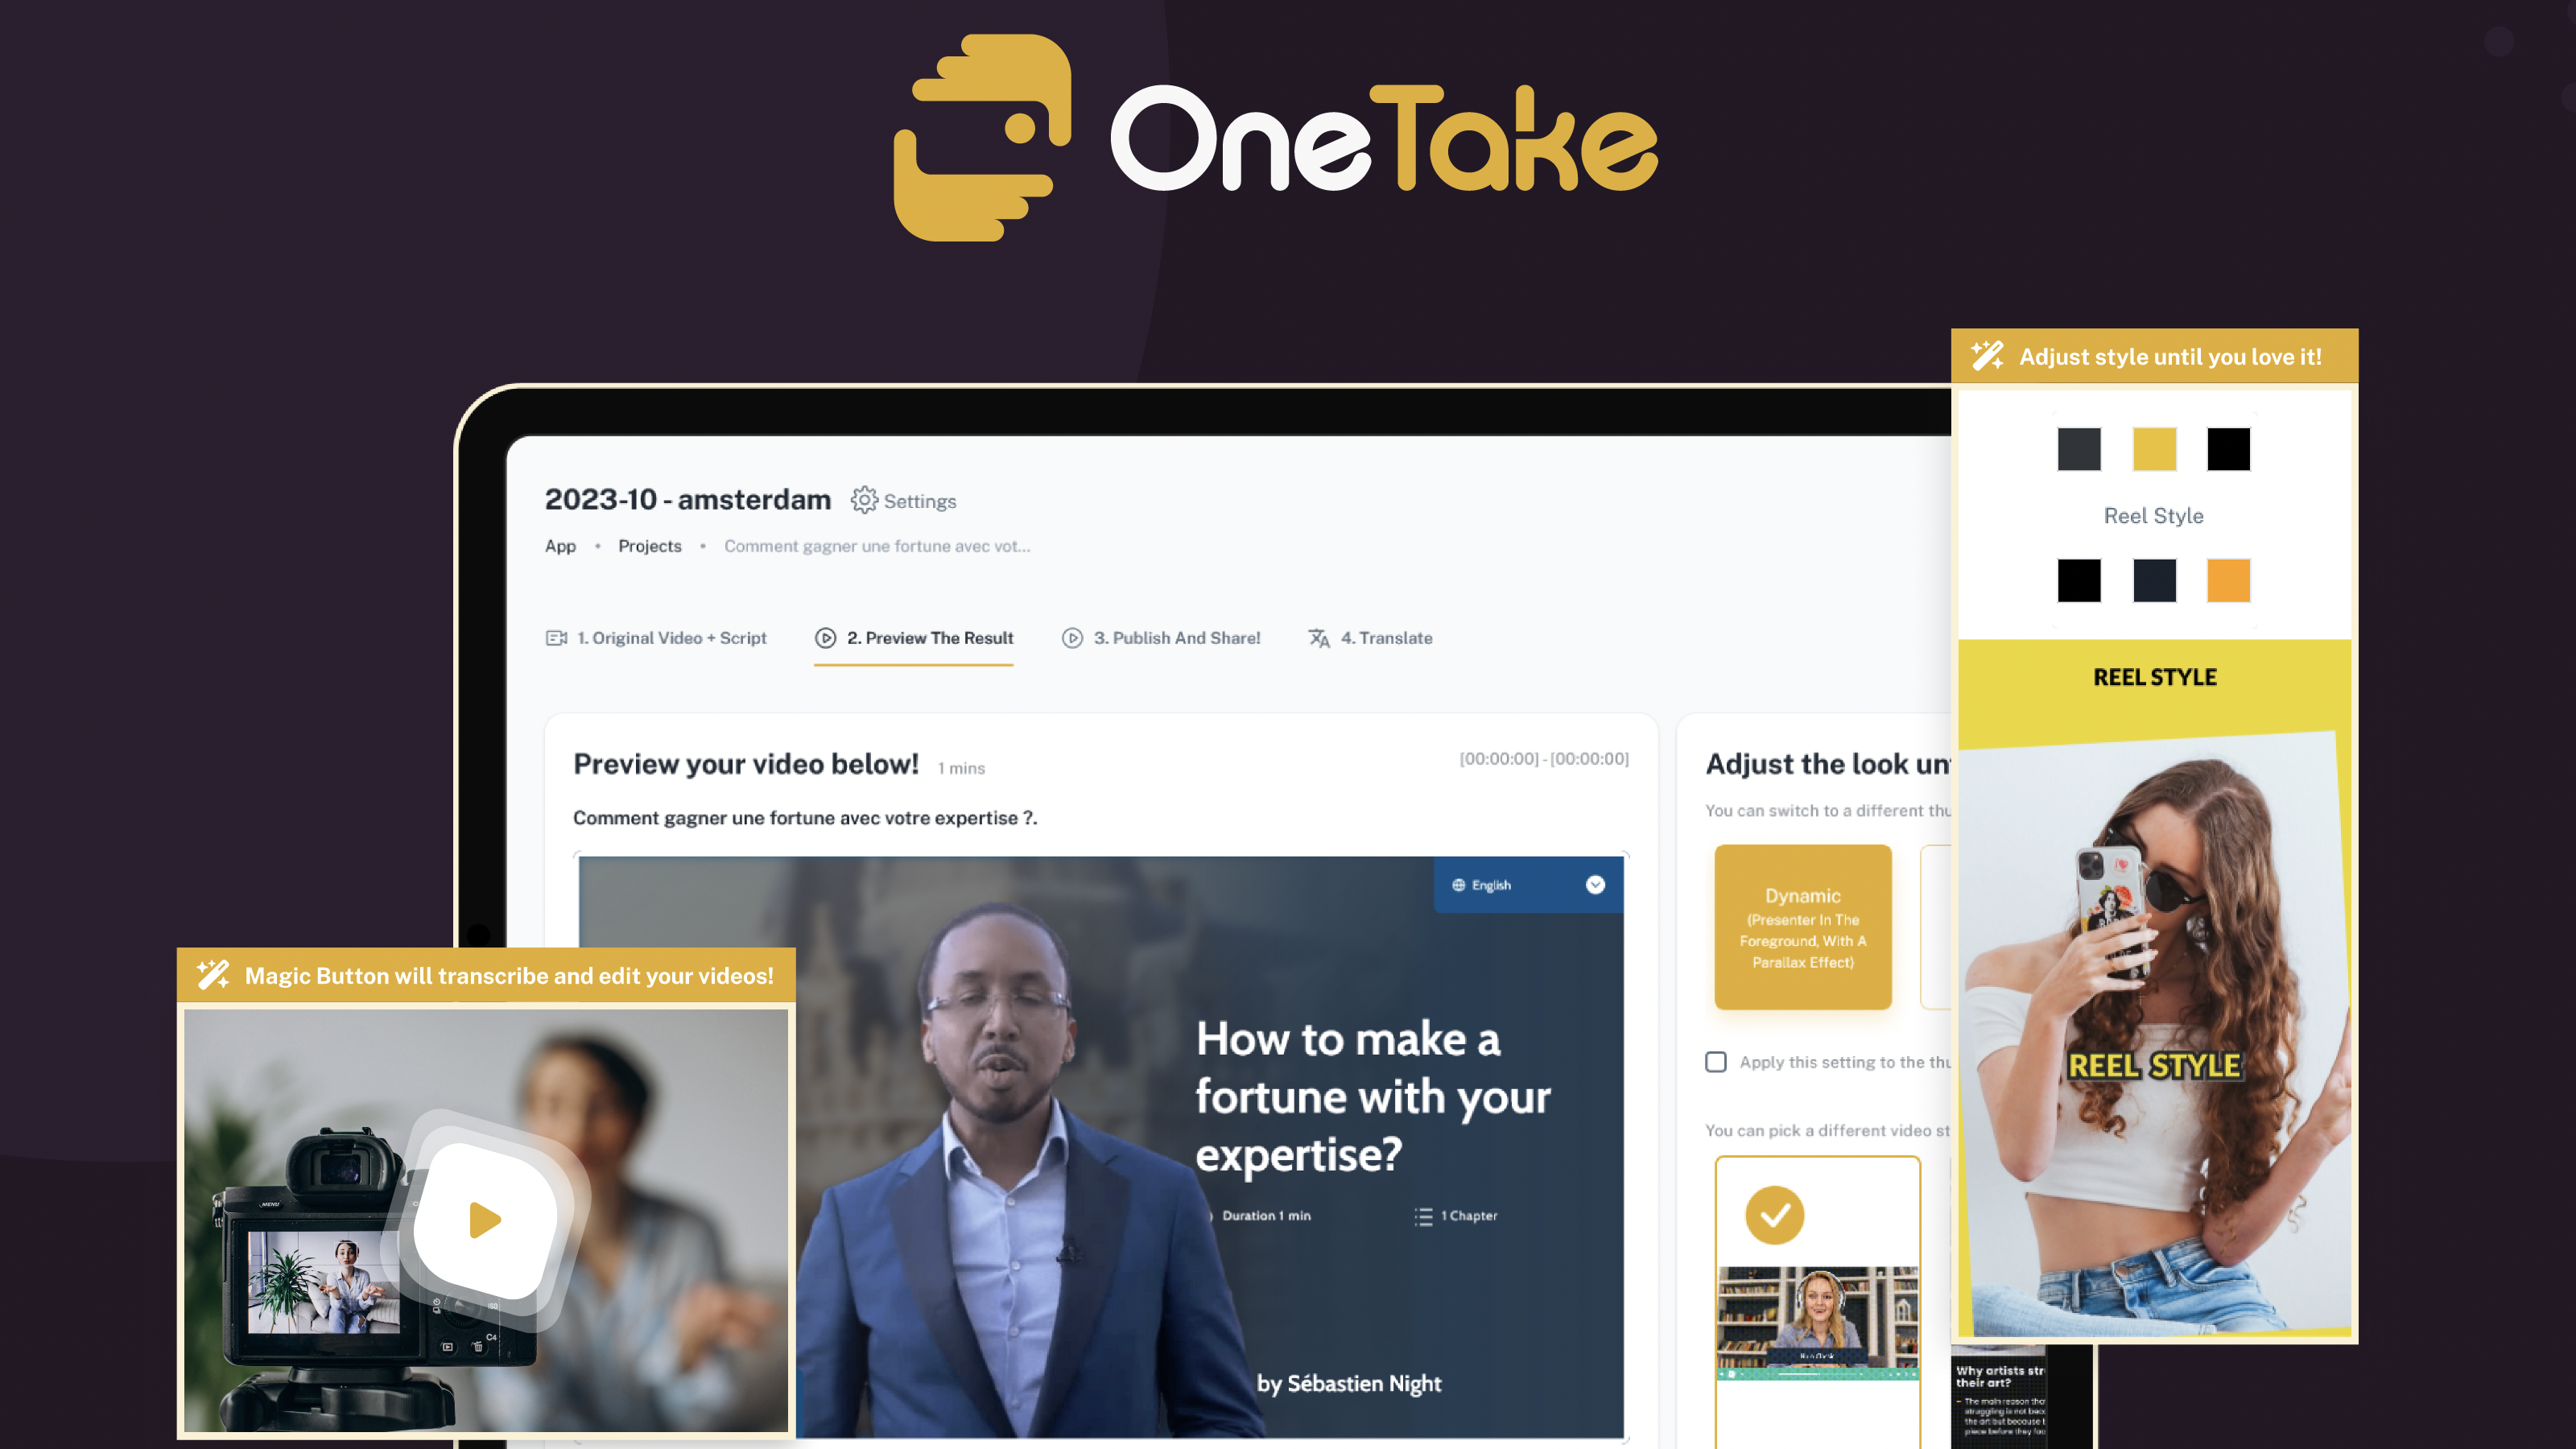 OneTake AI edits videos in a single click: entrepreneurs save tens of hours of grueling editing work and tens of thousands of dollars of freelancer costs.